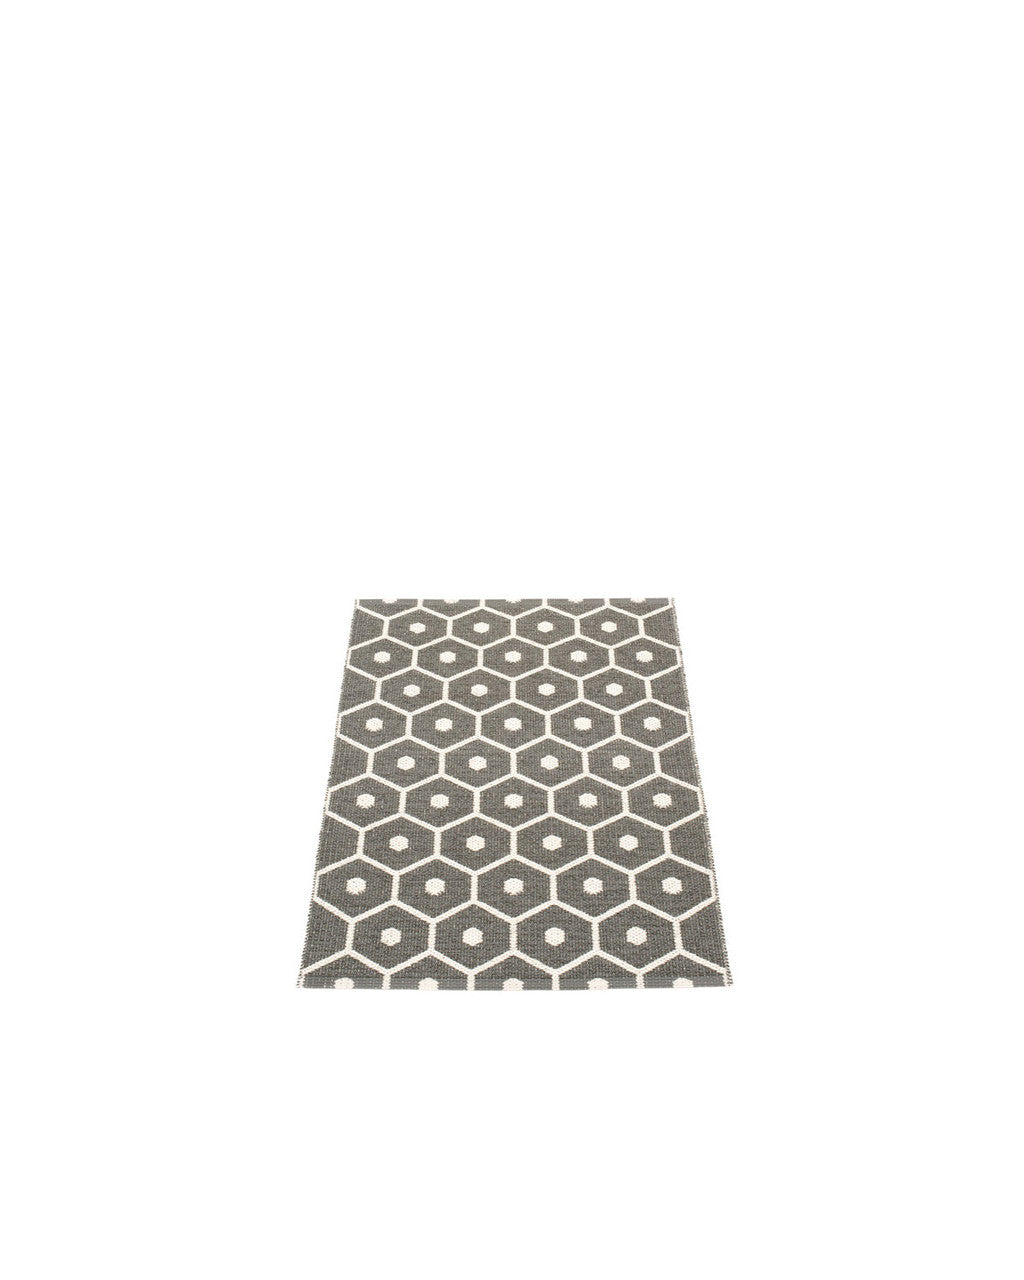 Rug HONEY Charcoal by Pappelina